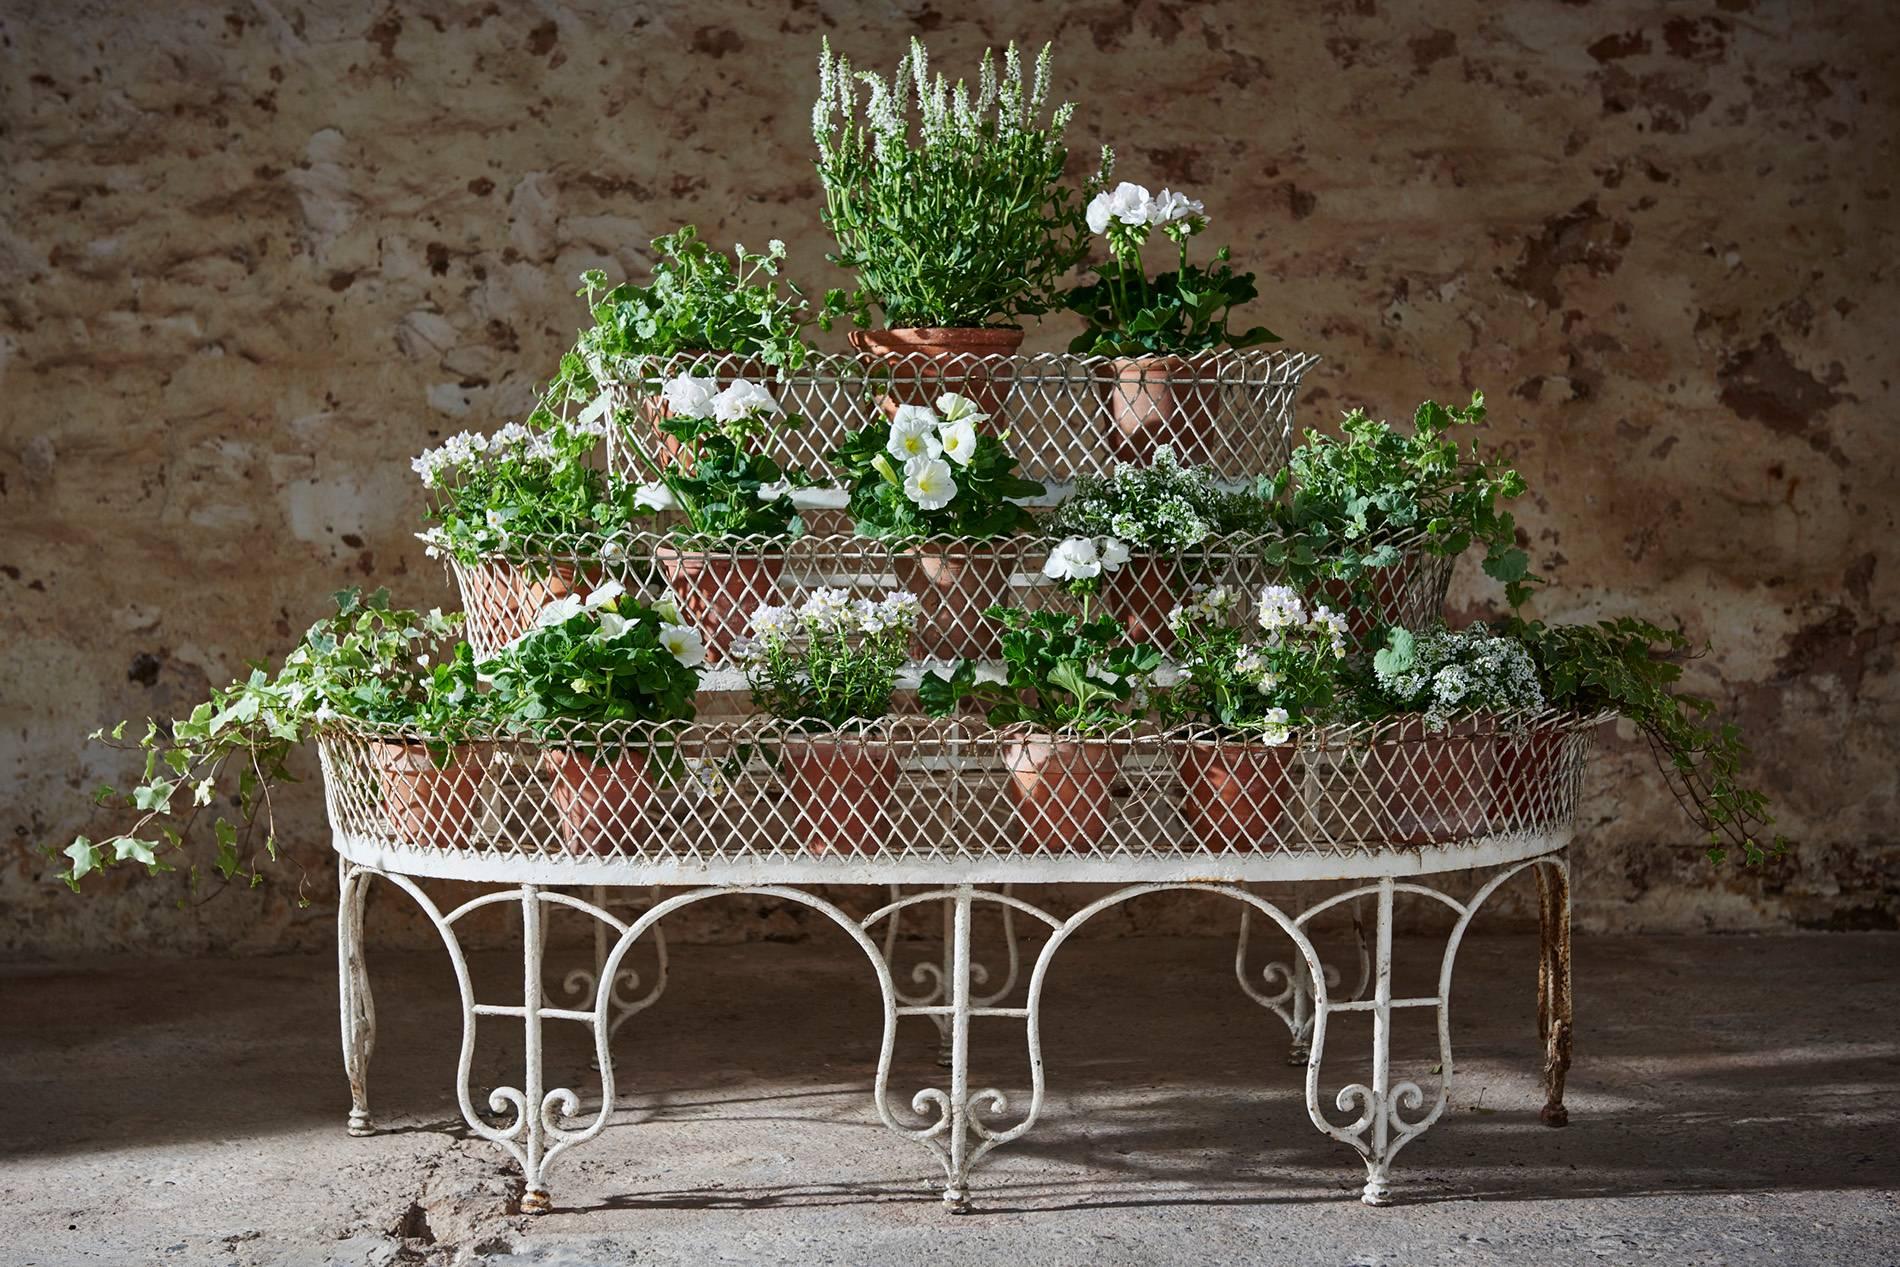 An exquisite three-tier French conservatory plant stand.

This absolutely beautiful conservatory planter was found in very romantic surroundings, in the orangery of a chateau in Northern France.

Orangeries were initially used for growing exotic